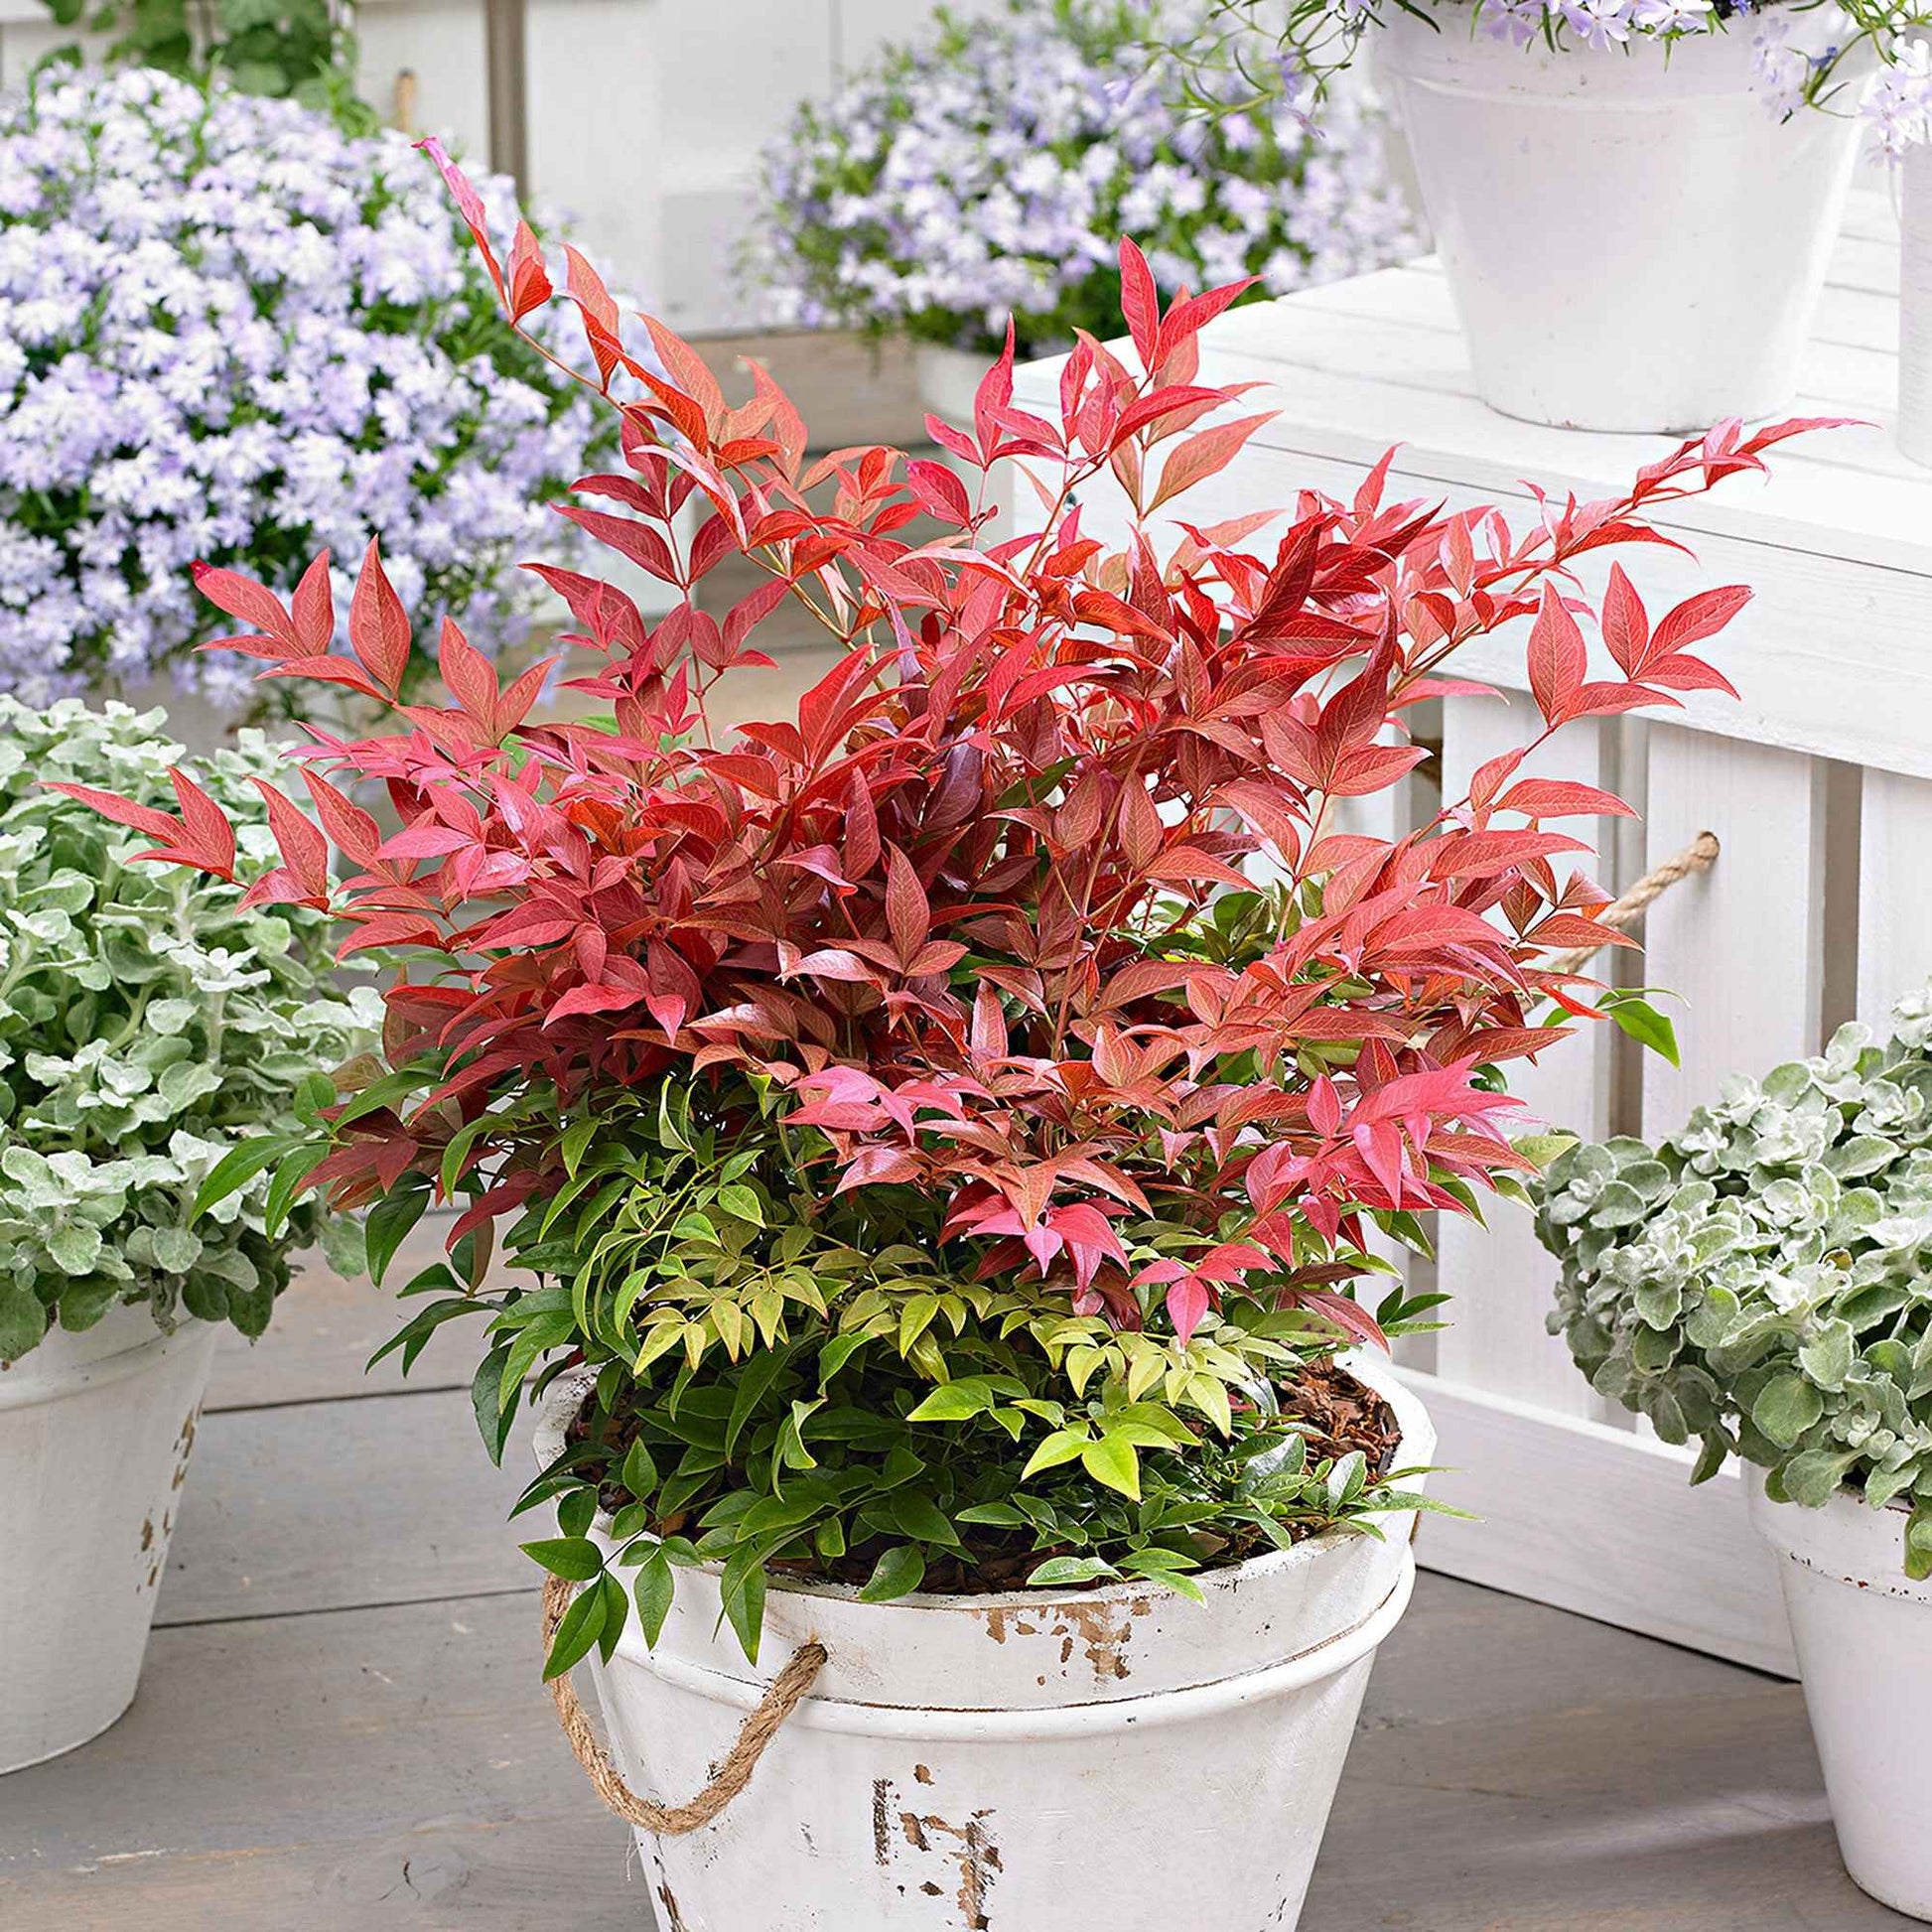 Himmelsbambus 'Obsessed' - Nandina domestica obsessed'® - Sträucher